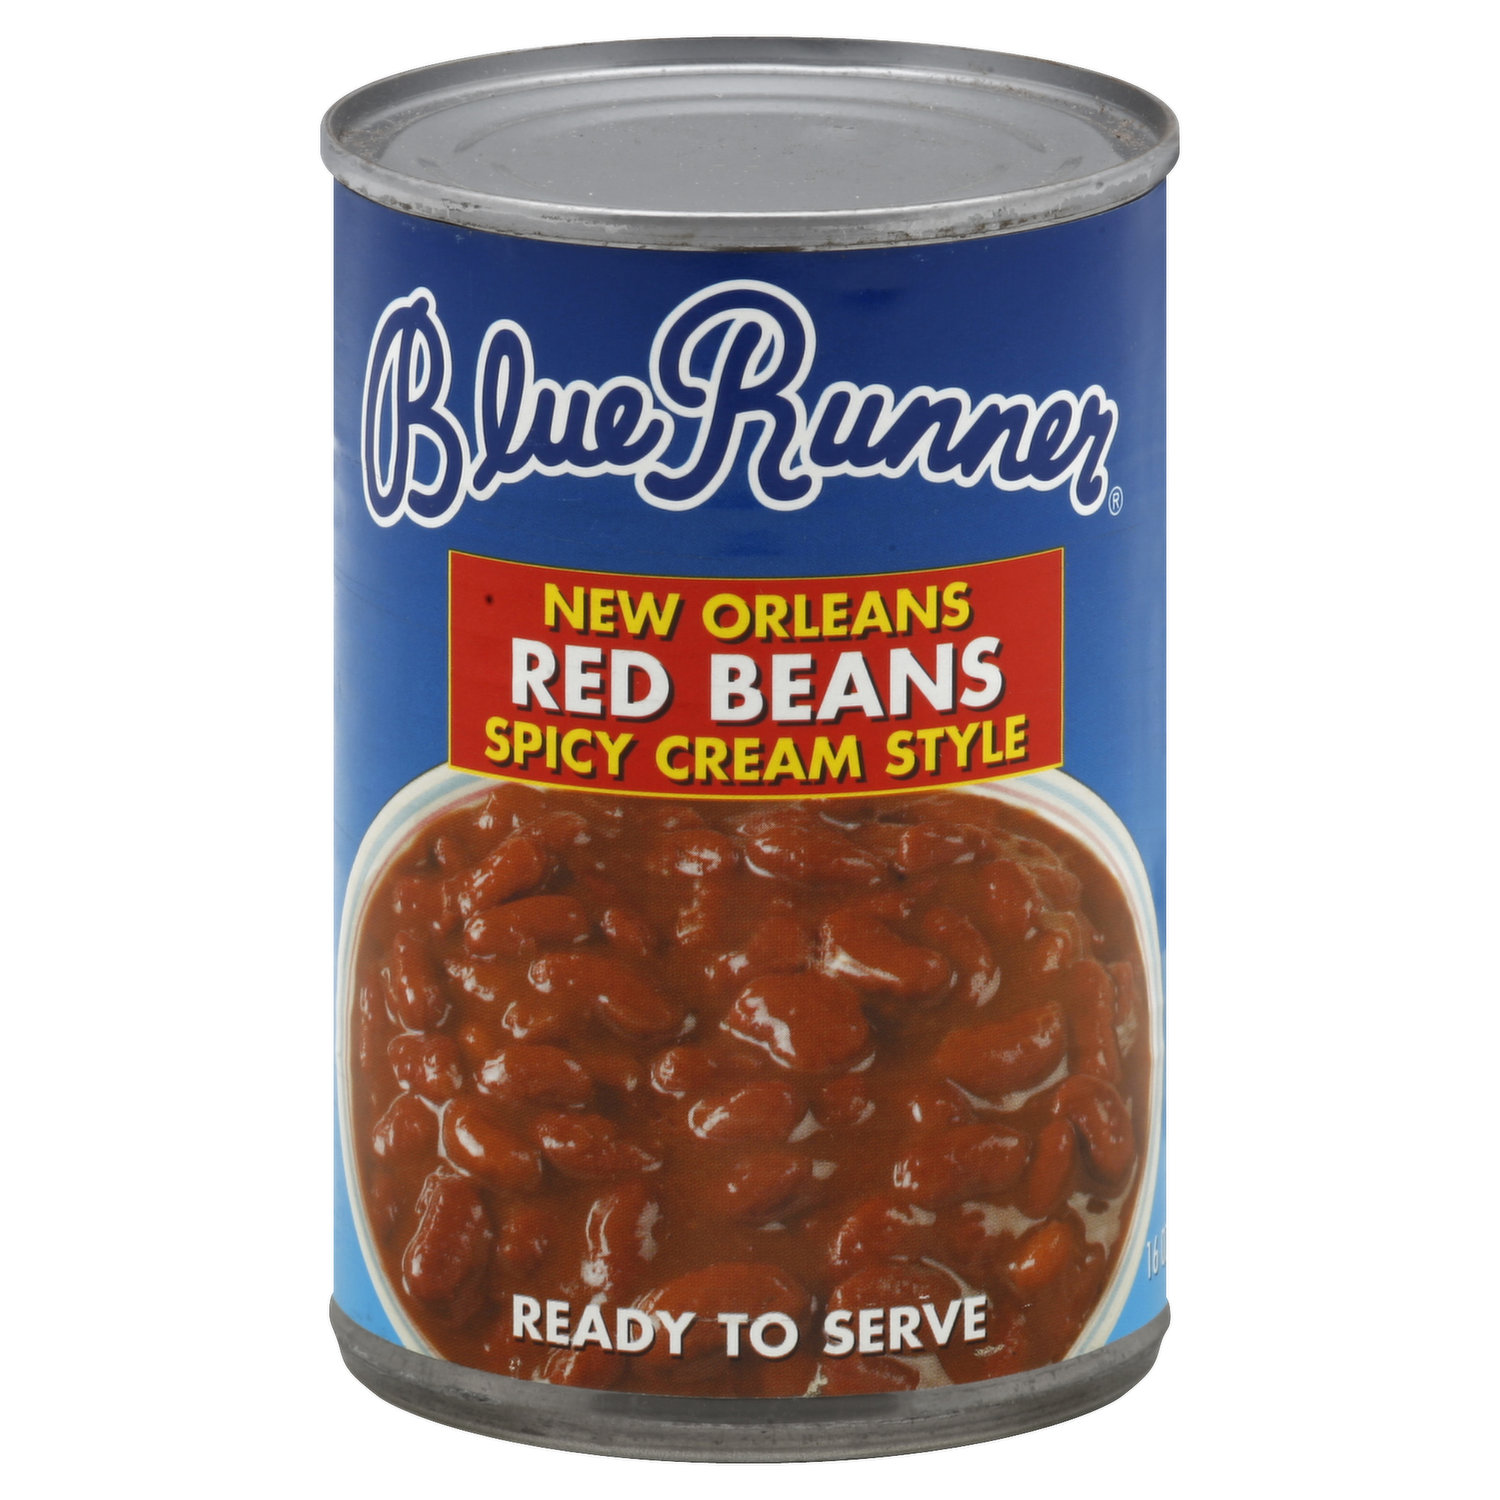 Blue Runner Red Beans, New Orleans, Spicy Cream Style - Brookshire's